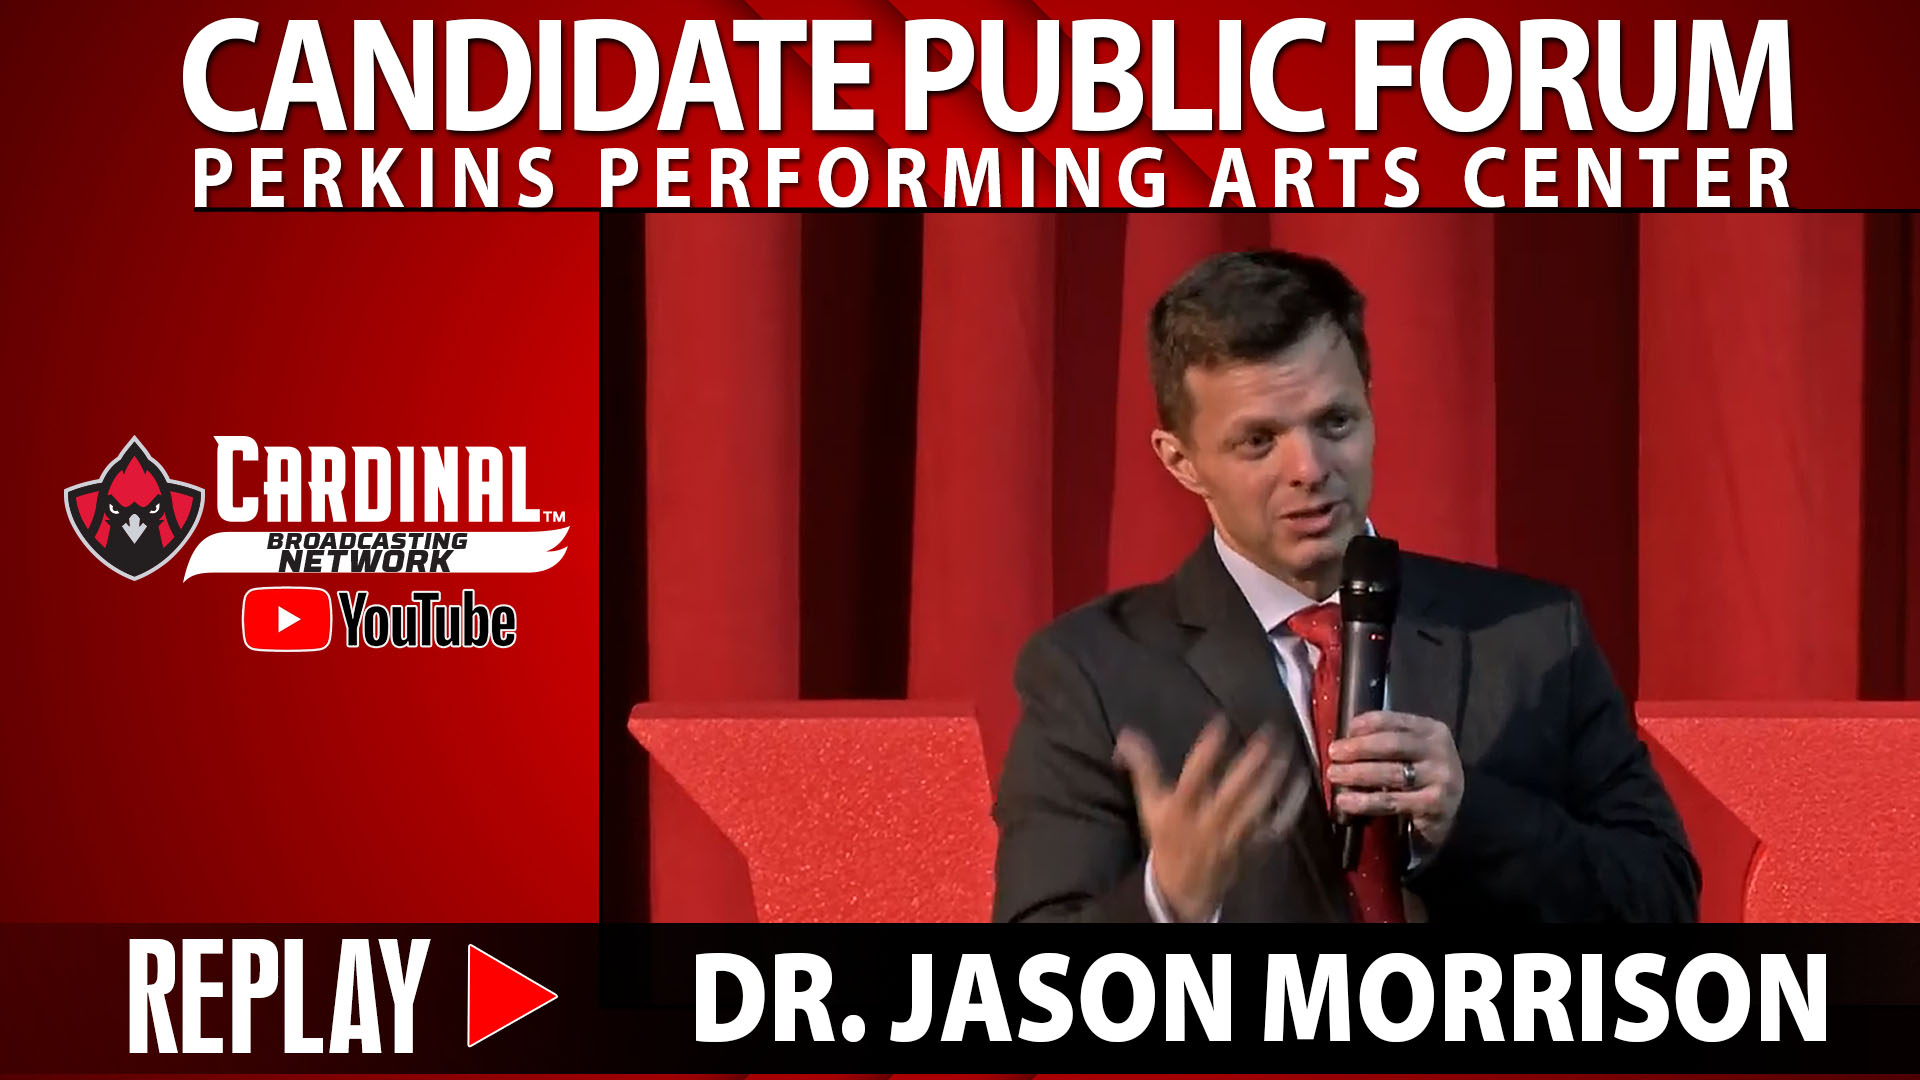 Candidate Public Forum - Perkins Performing Arts Center - Replay - Dr. Jason Morrison